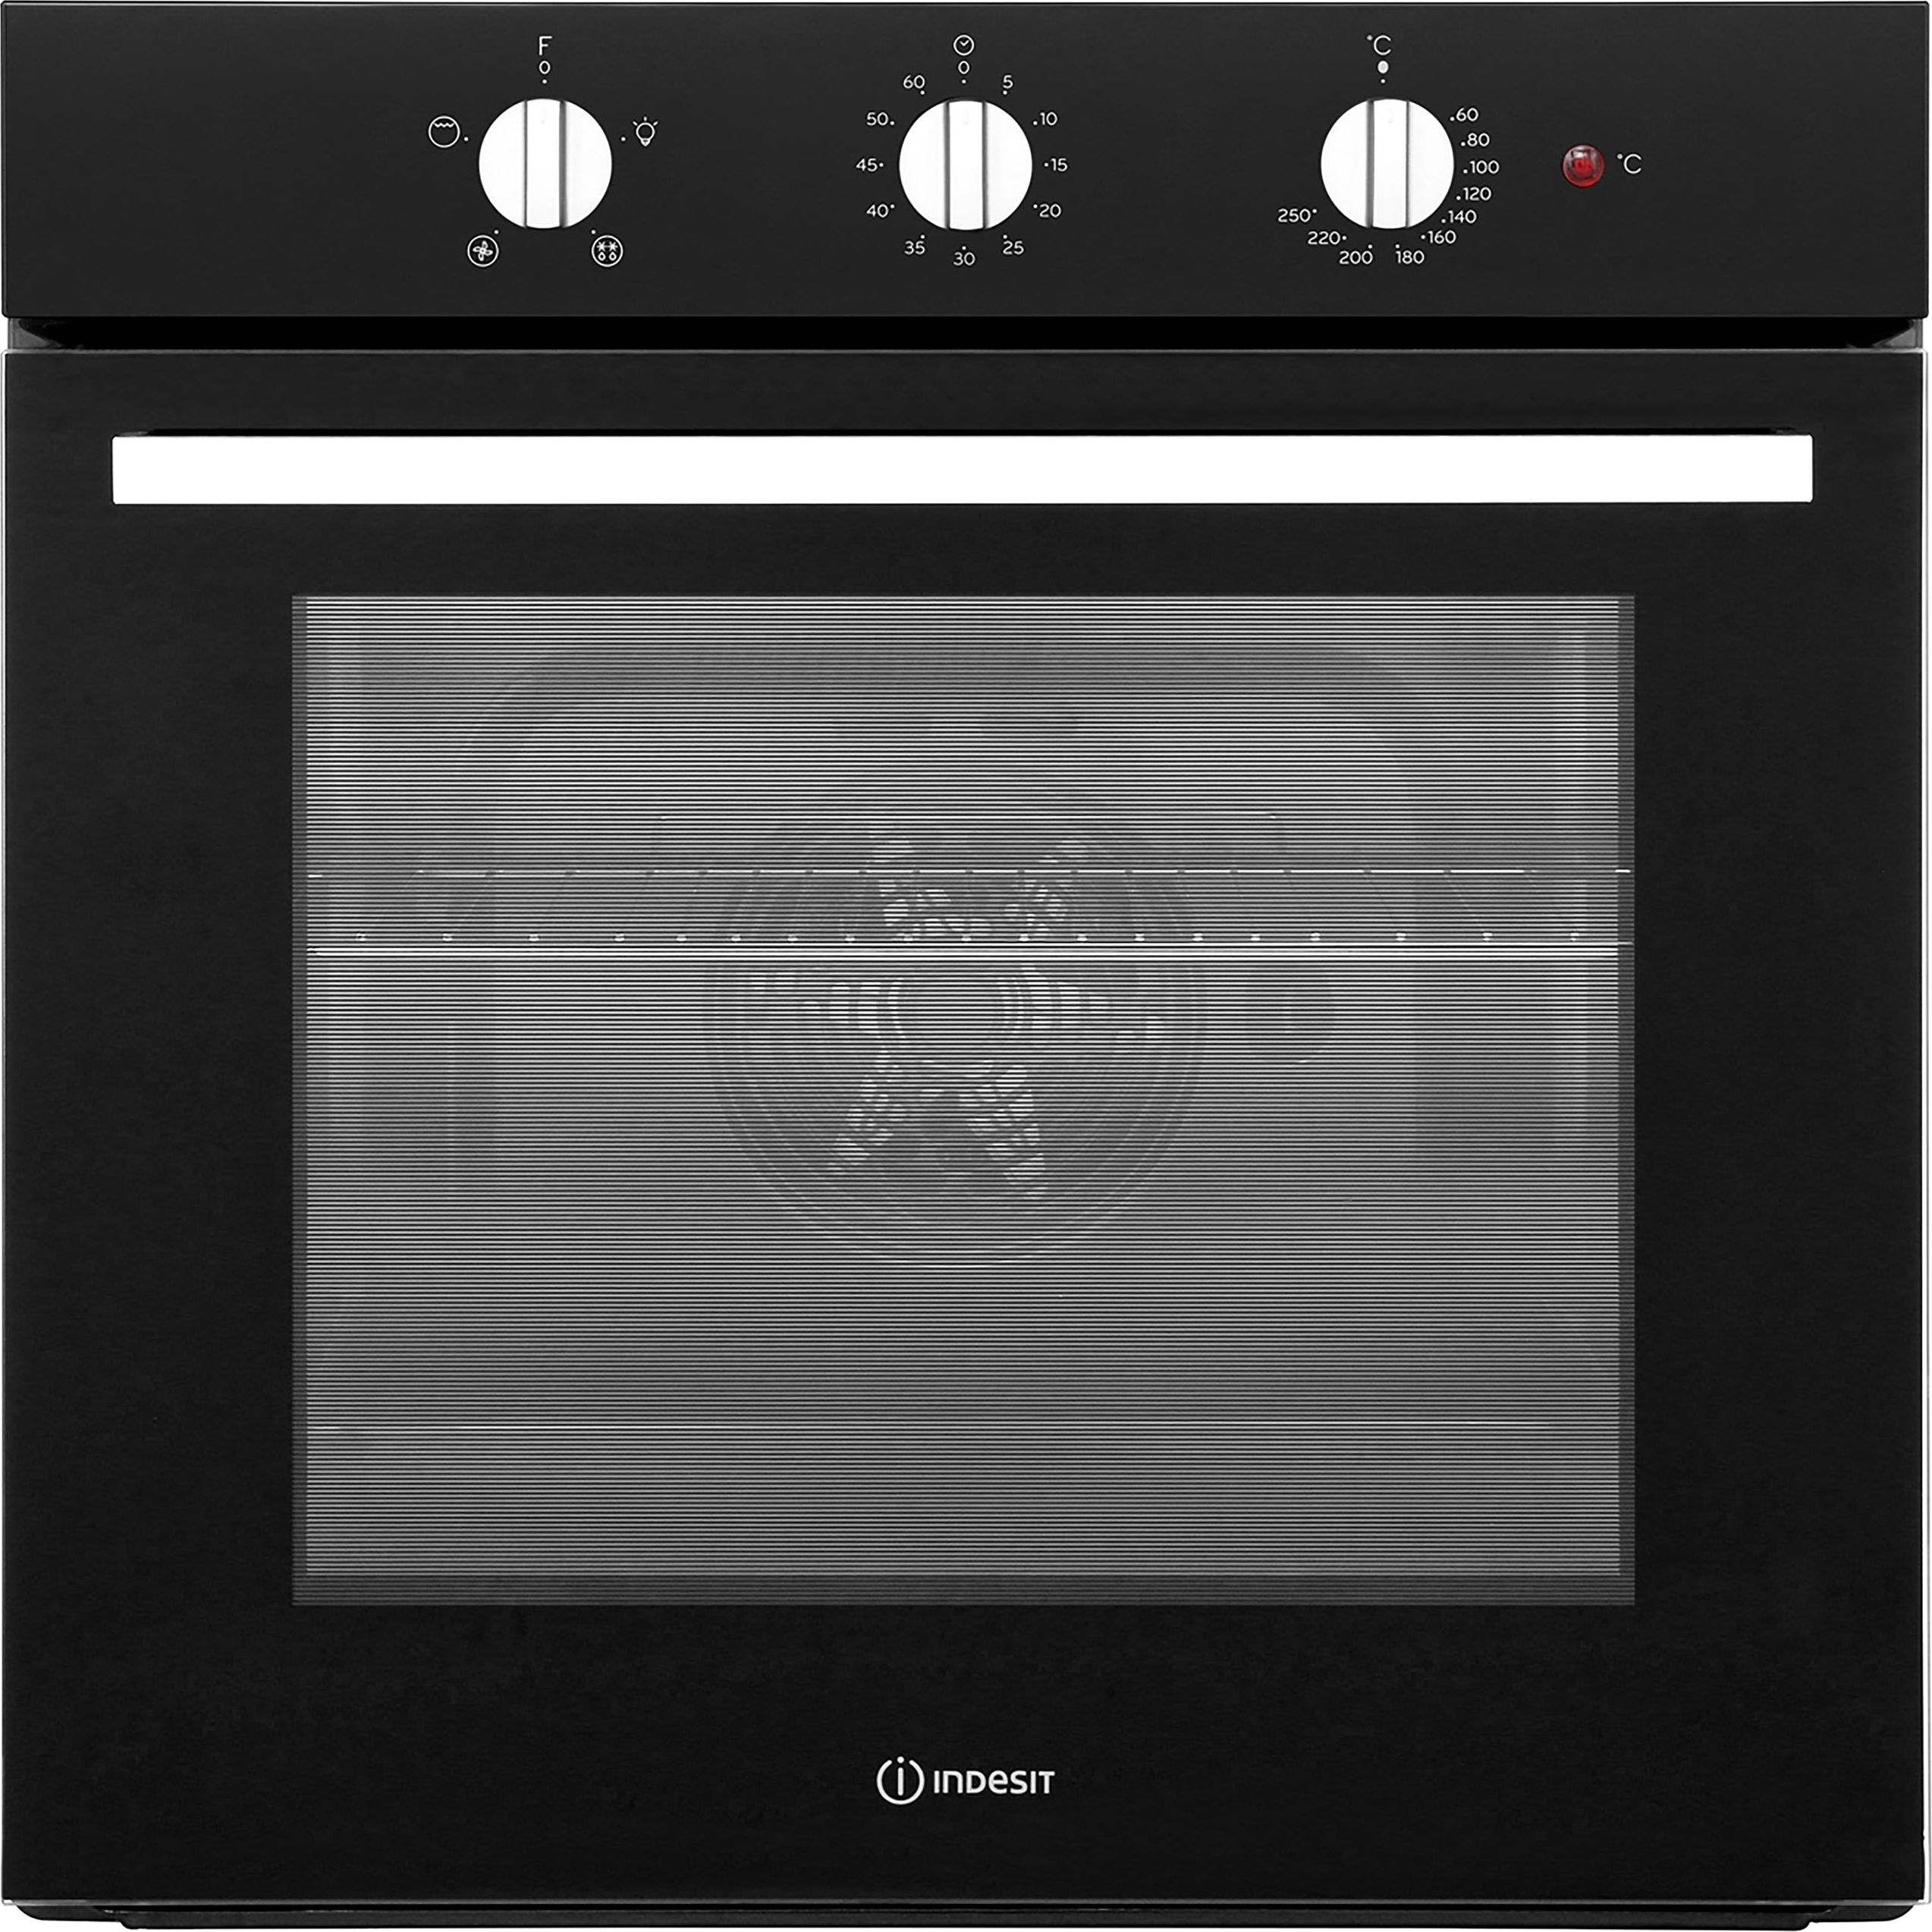 Indesit Aria IFW6330BL Built In Electric Single Oven - Black - A Rated, Black